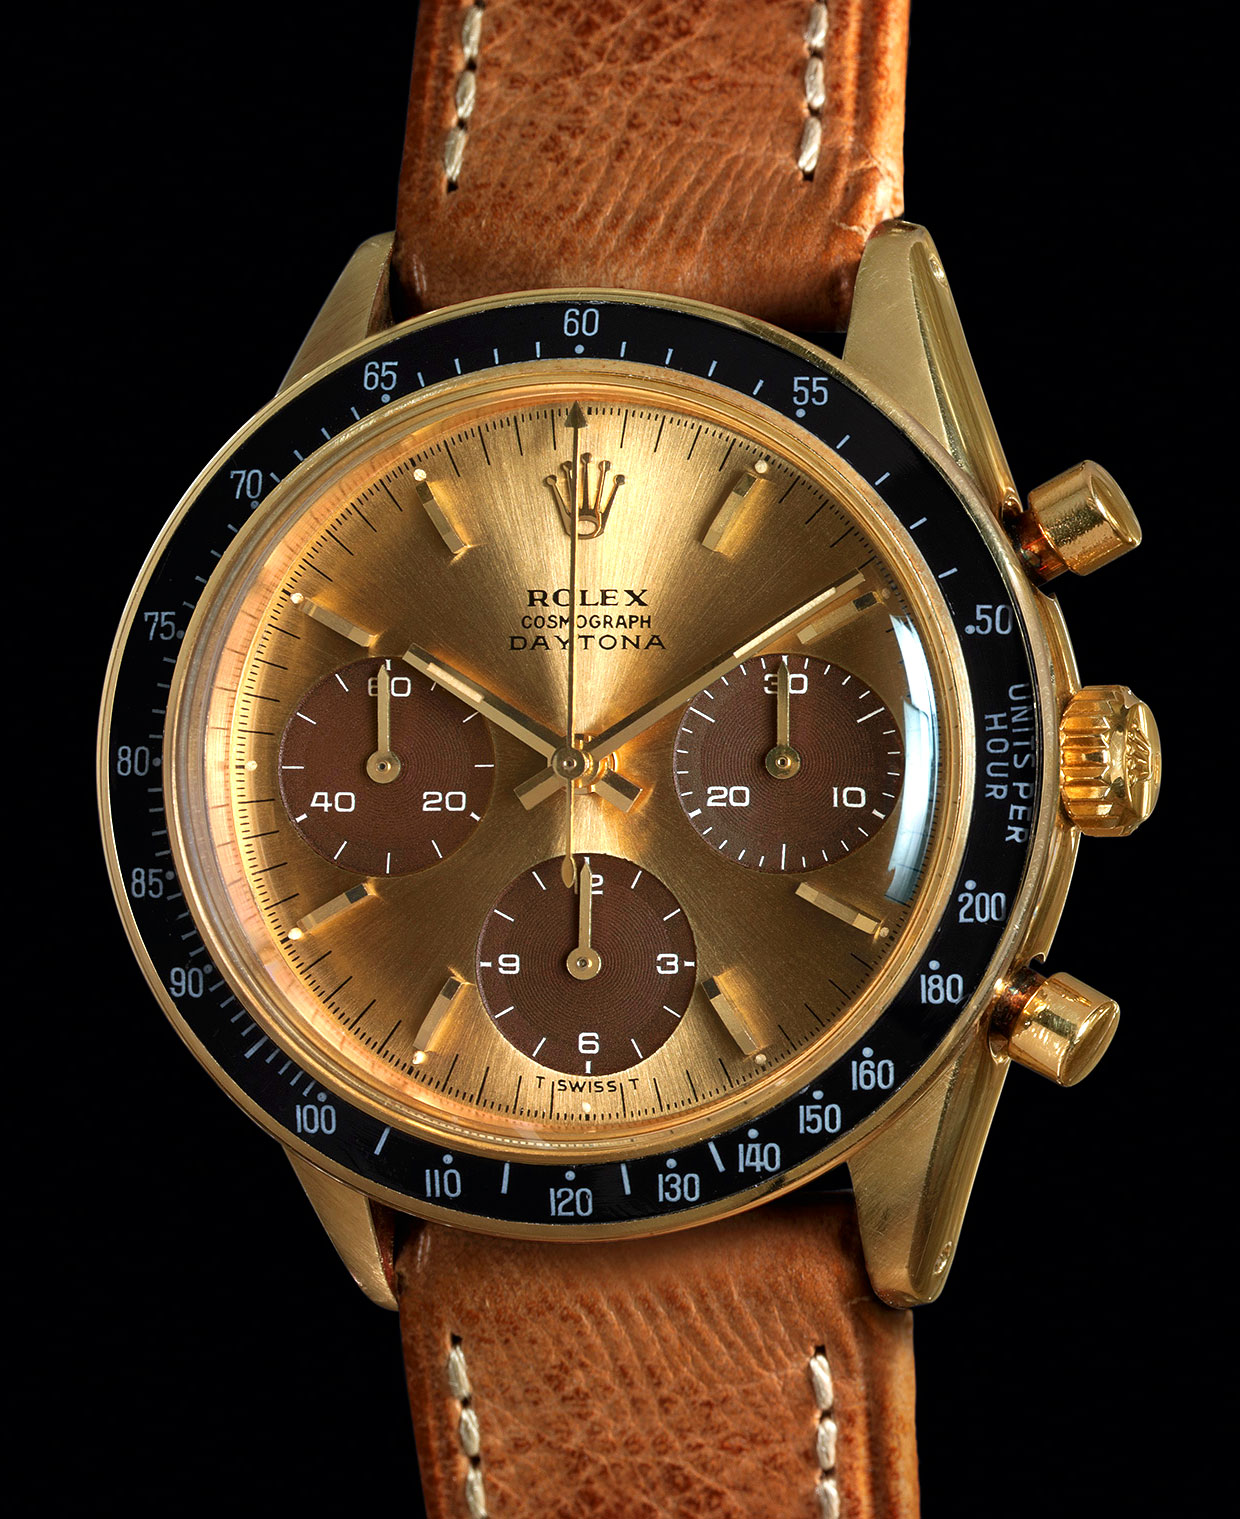 Rolex Daytona Reference With Chocolate Sub Dials